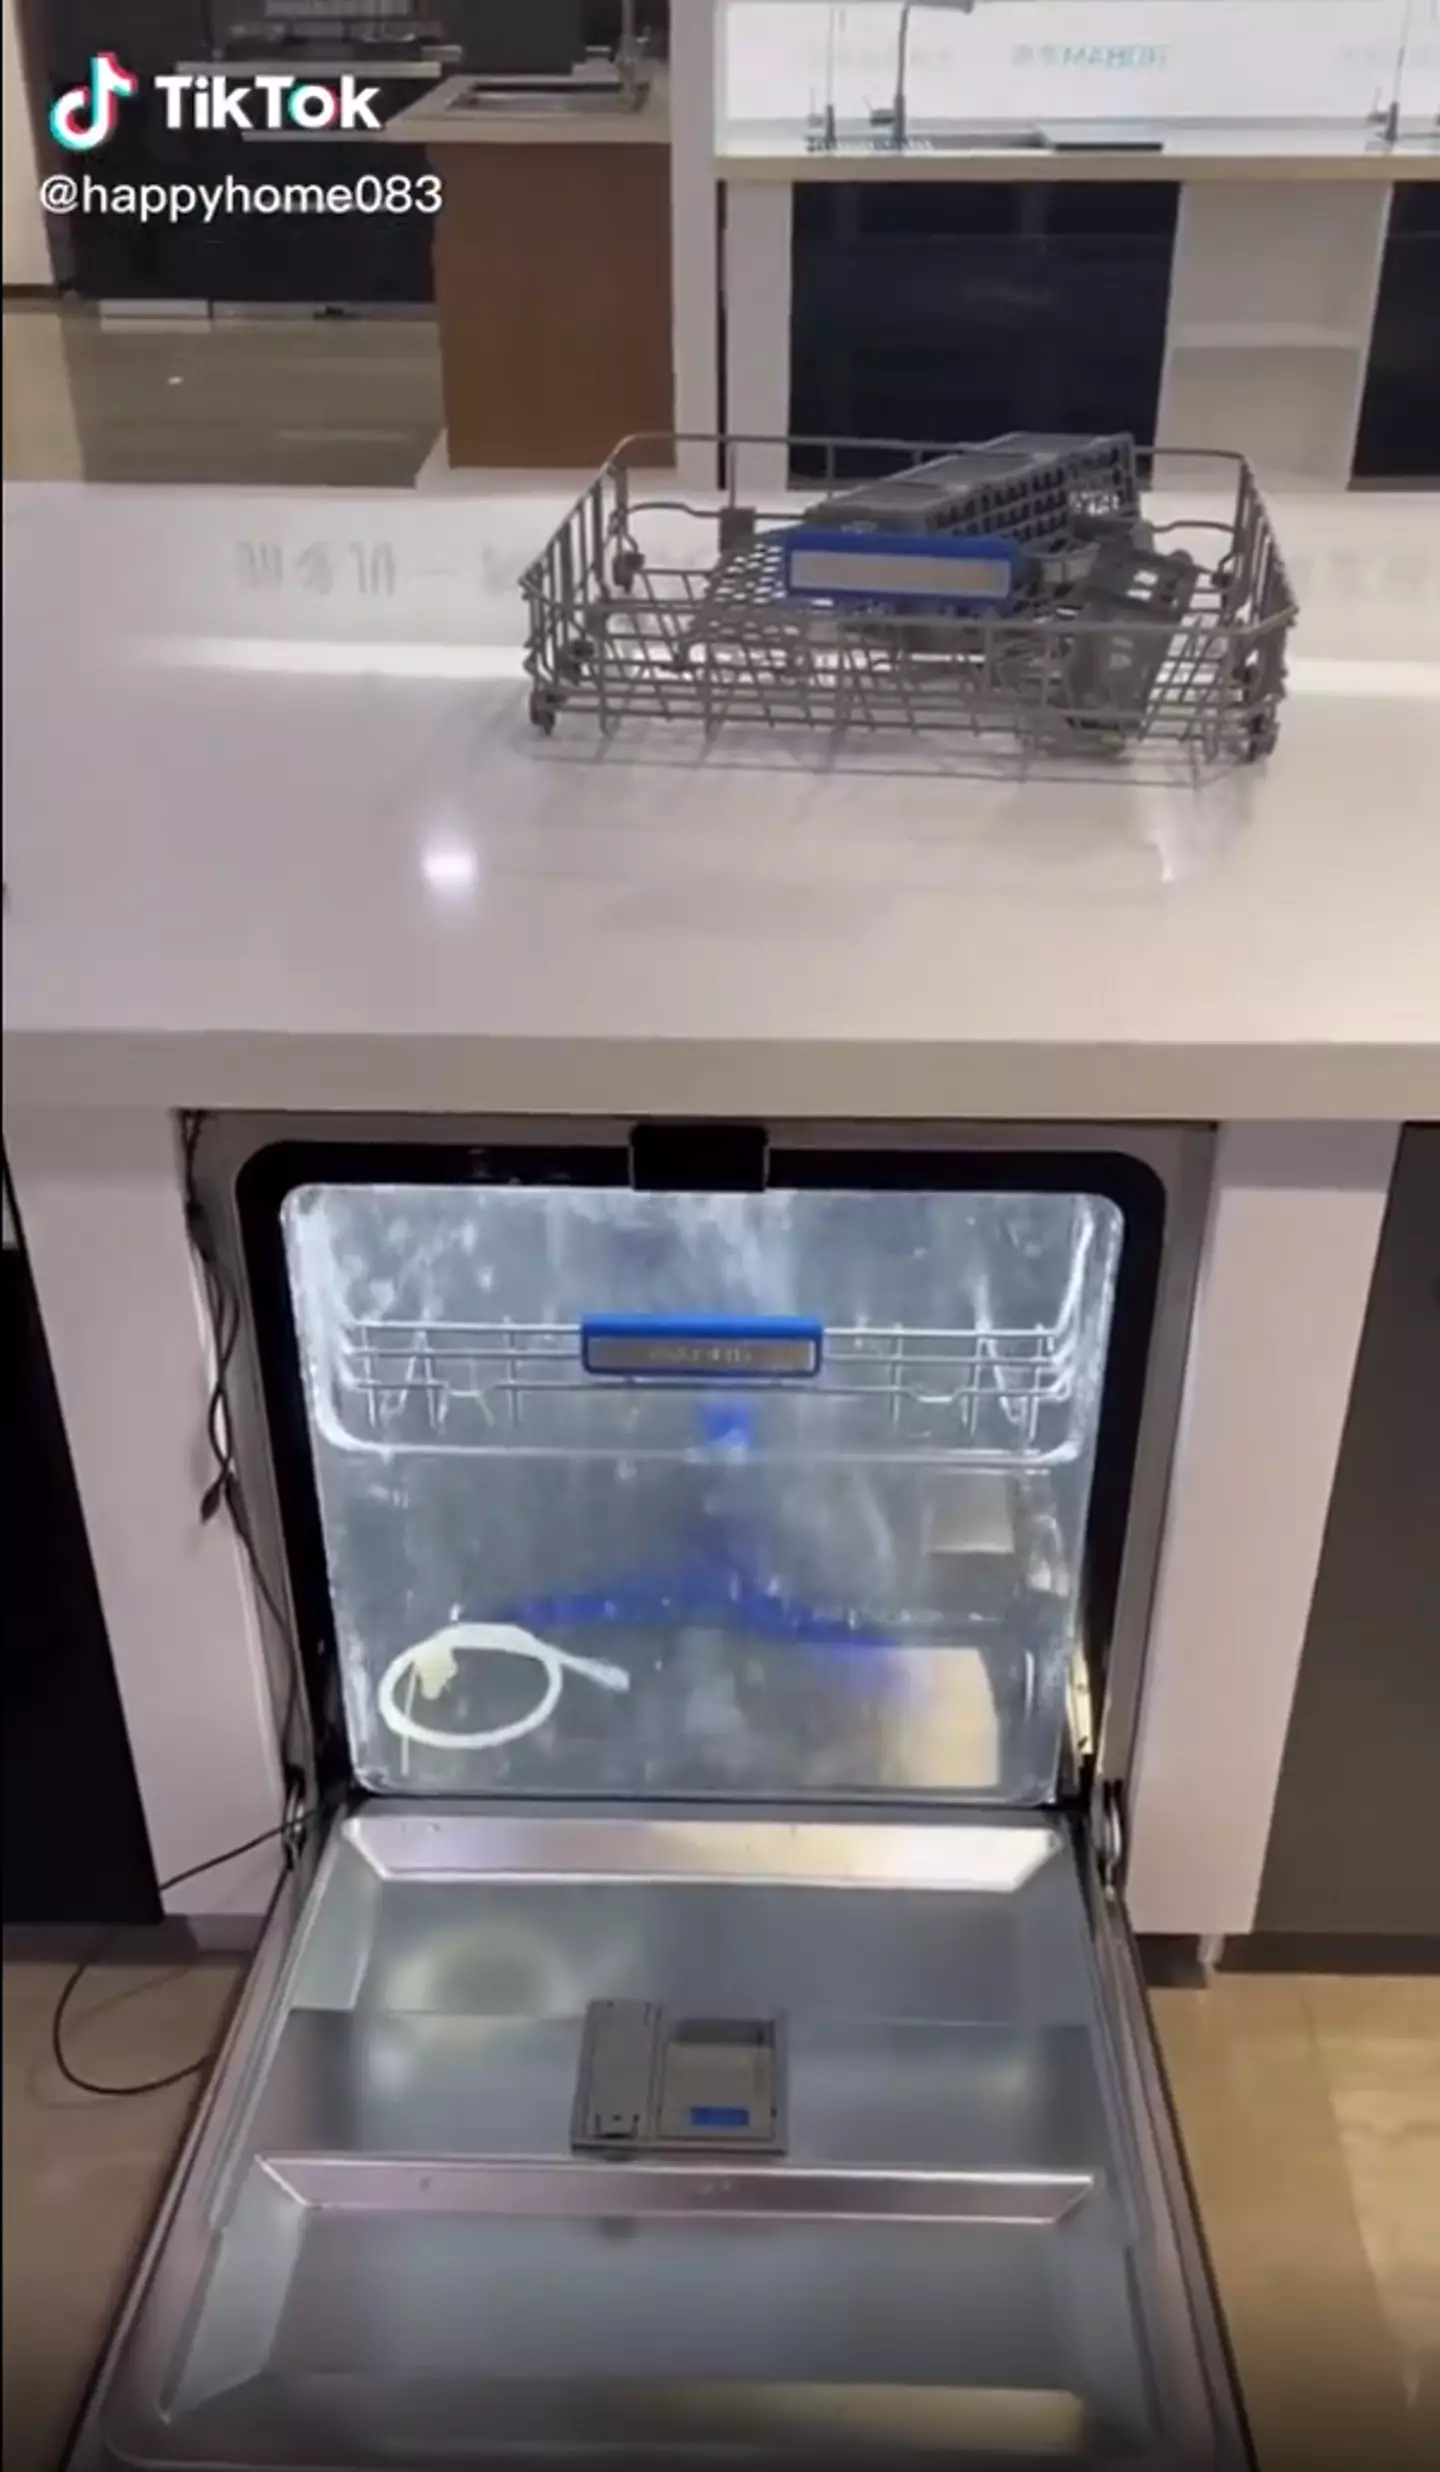 Some viewers said they thought the machine would fill up like a washing machine. (